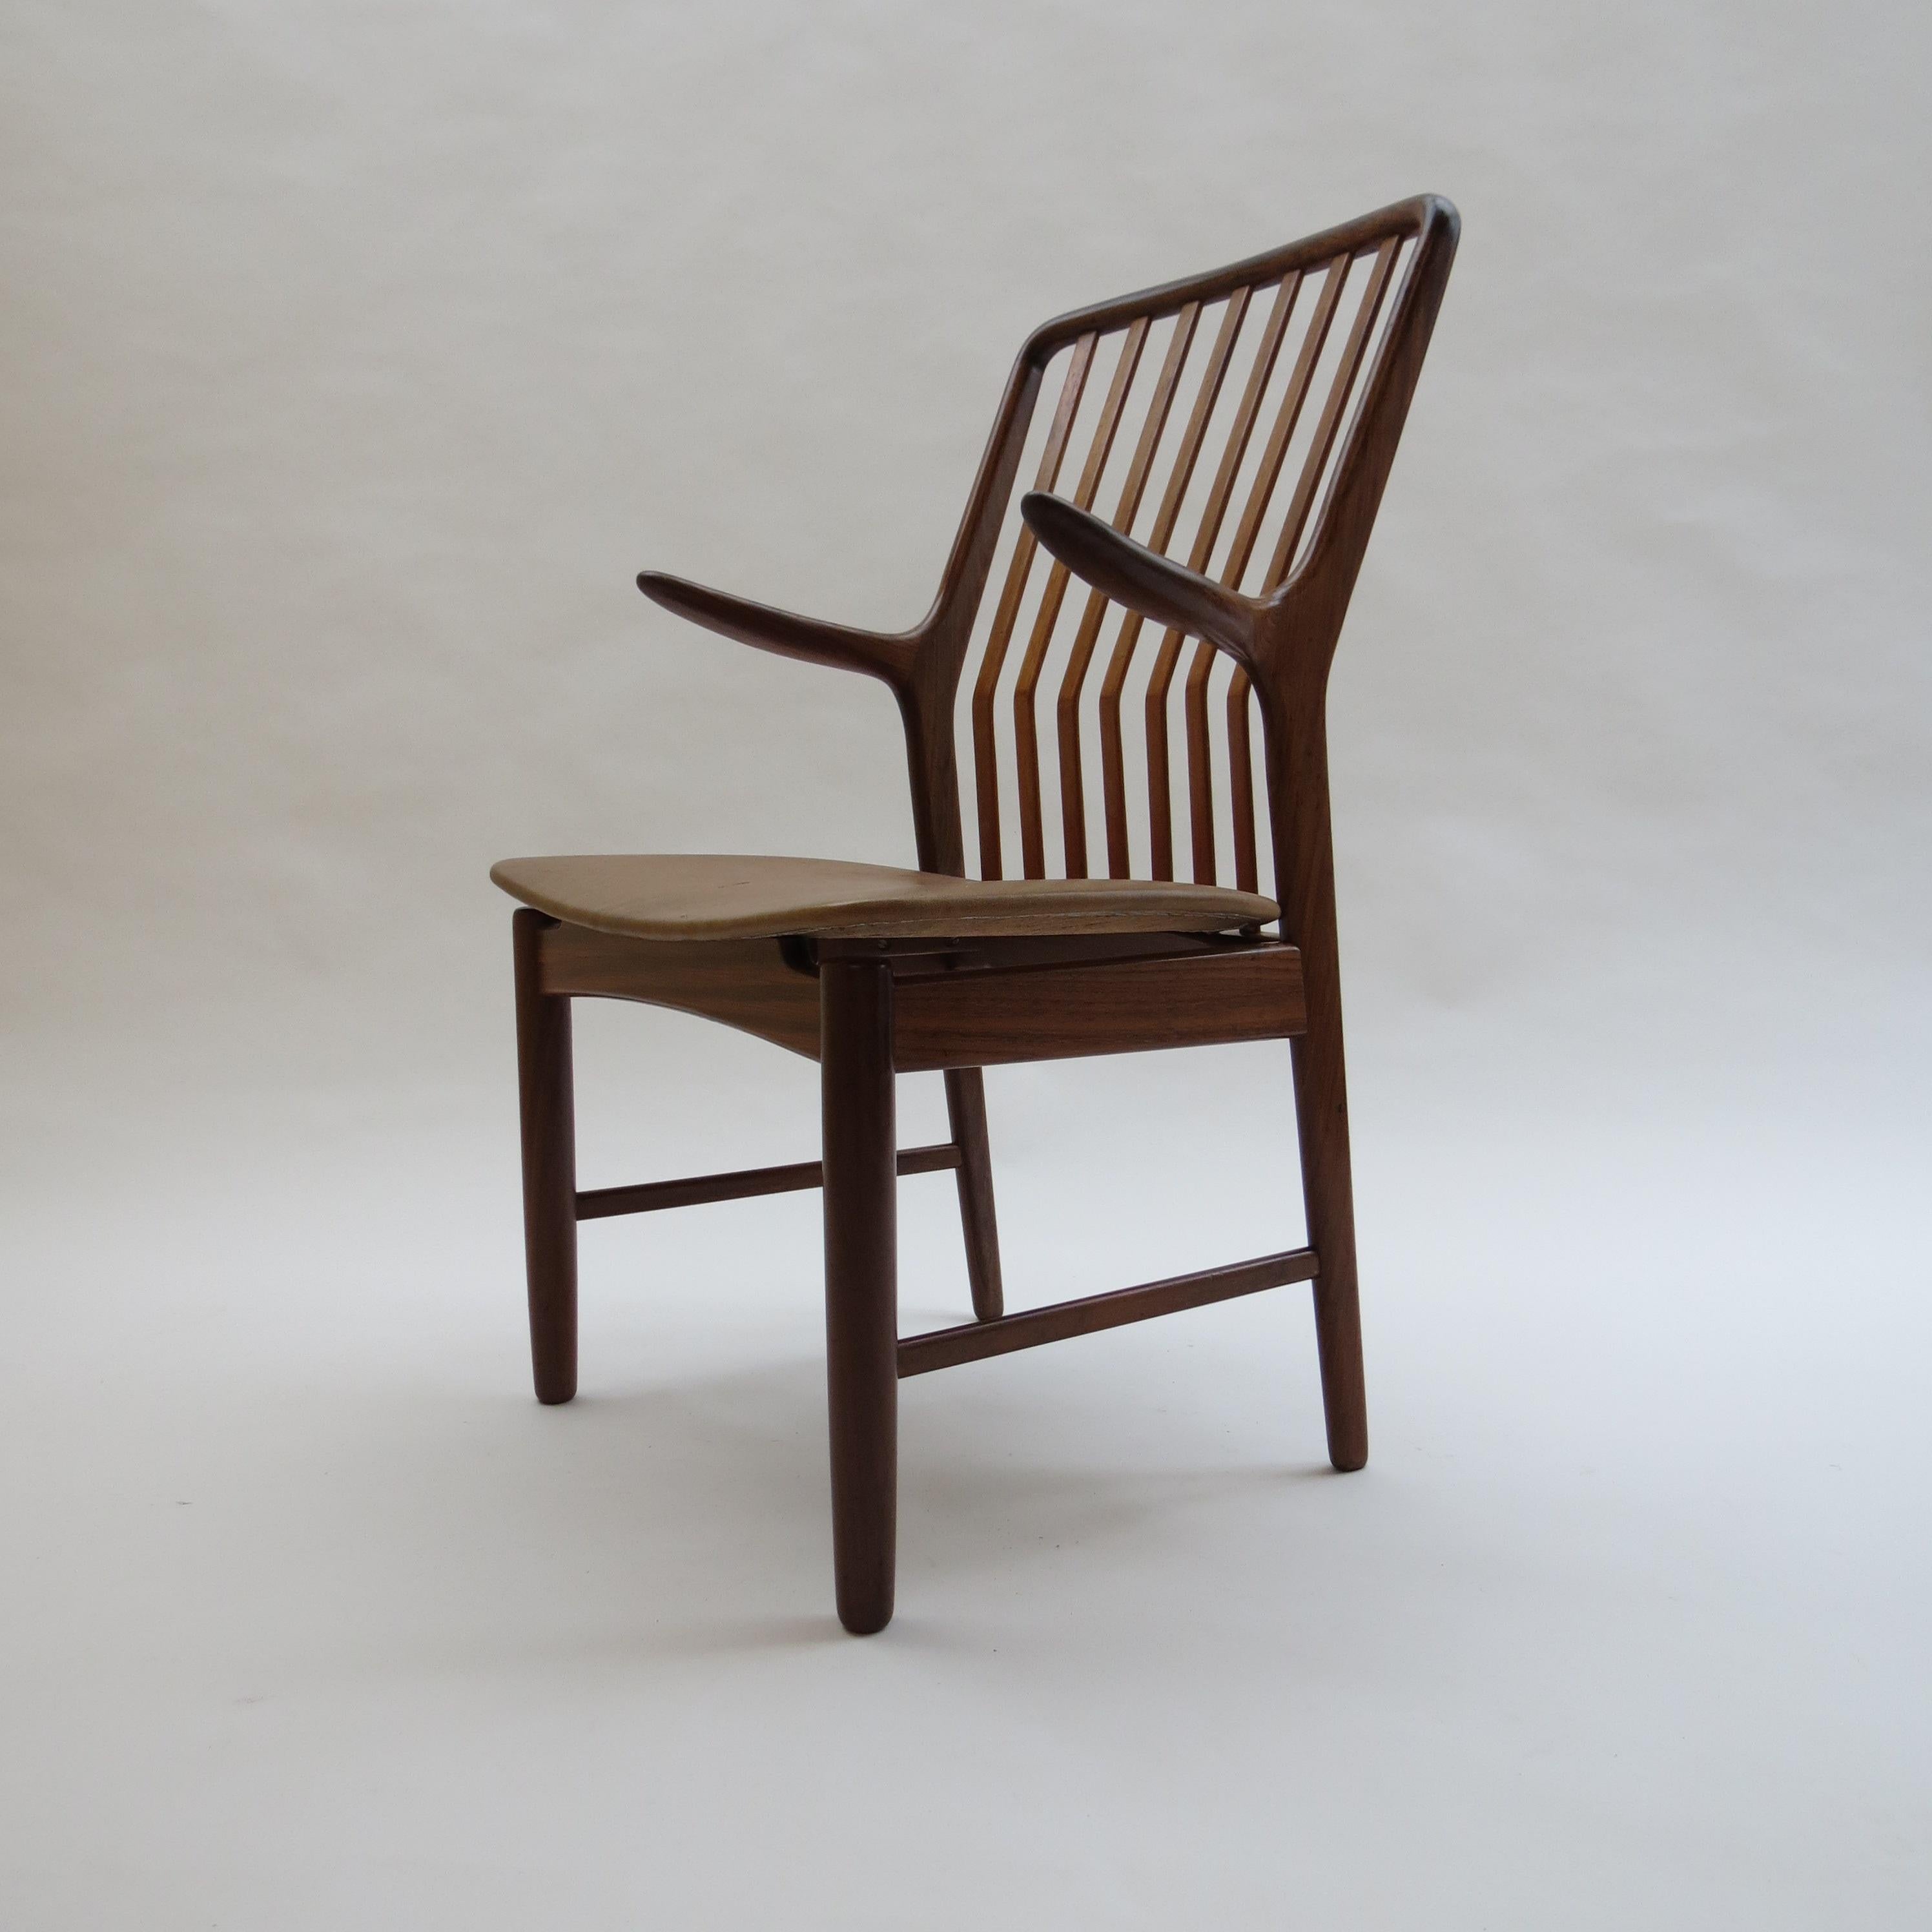 Midcentury Danish chair by Svend Madsen from the 1960s. Teak frame and newly reupholstered seat in vintage brown leather.

Designed by Svend Madsen, Denmark.

In good condition, the seat has recently been reupholstered with vintage leather. Stunning